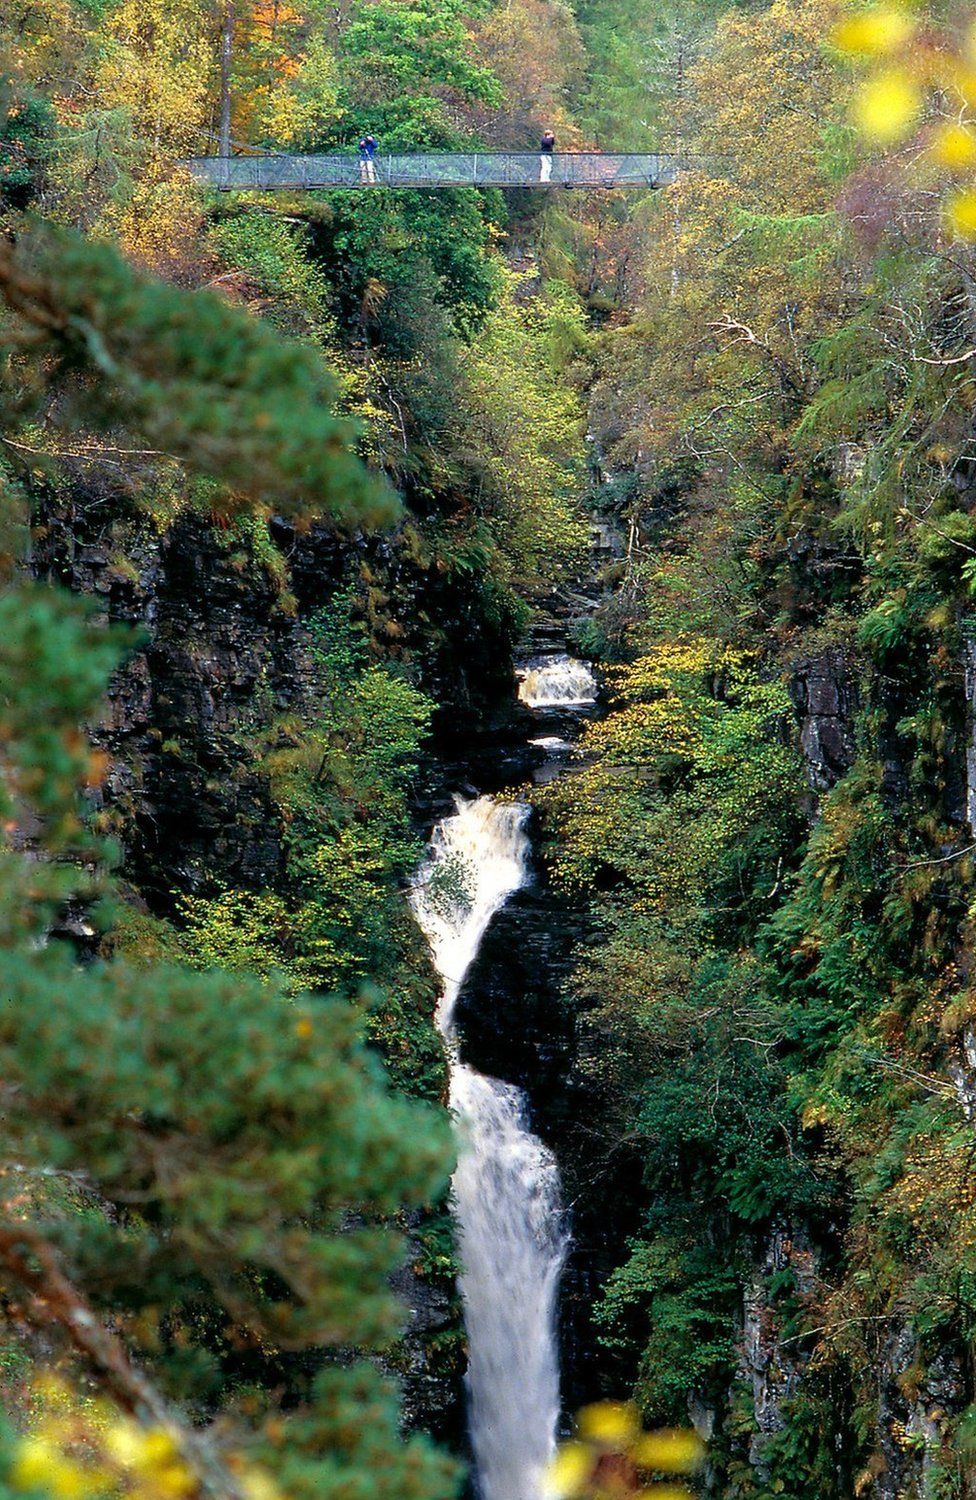 The gorge is known for its biodiversity; having a diverse range of native trees including hazel, rowan and birch.